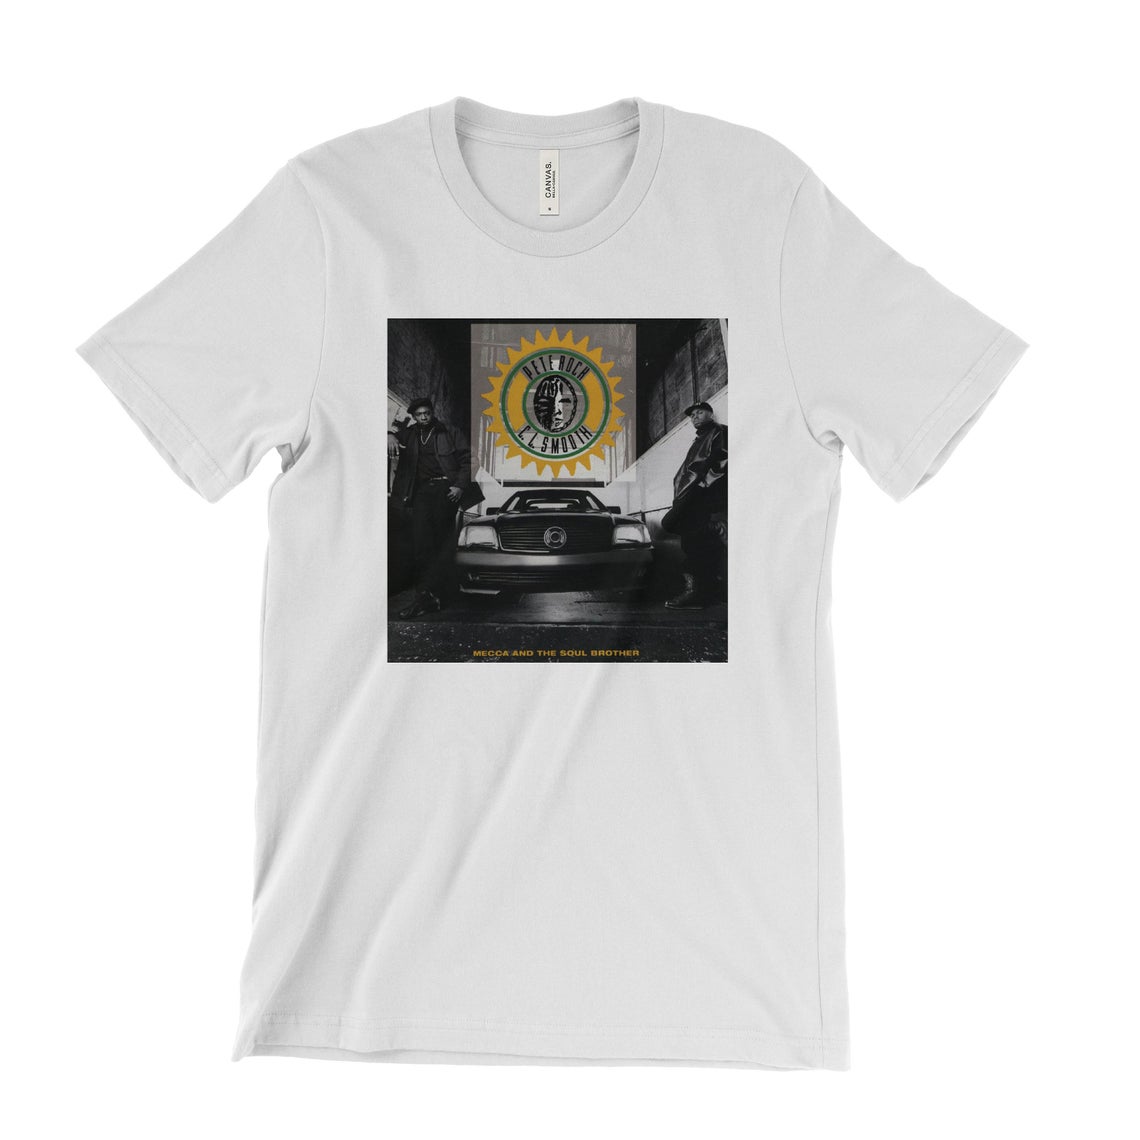 Pete Rock & C.L. Smooth Mecca and the Soul Brother T-Shirt NA